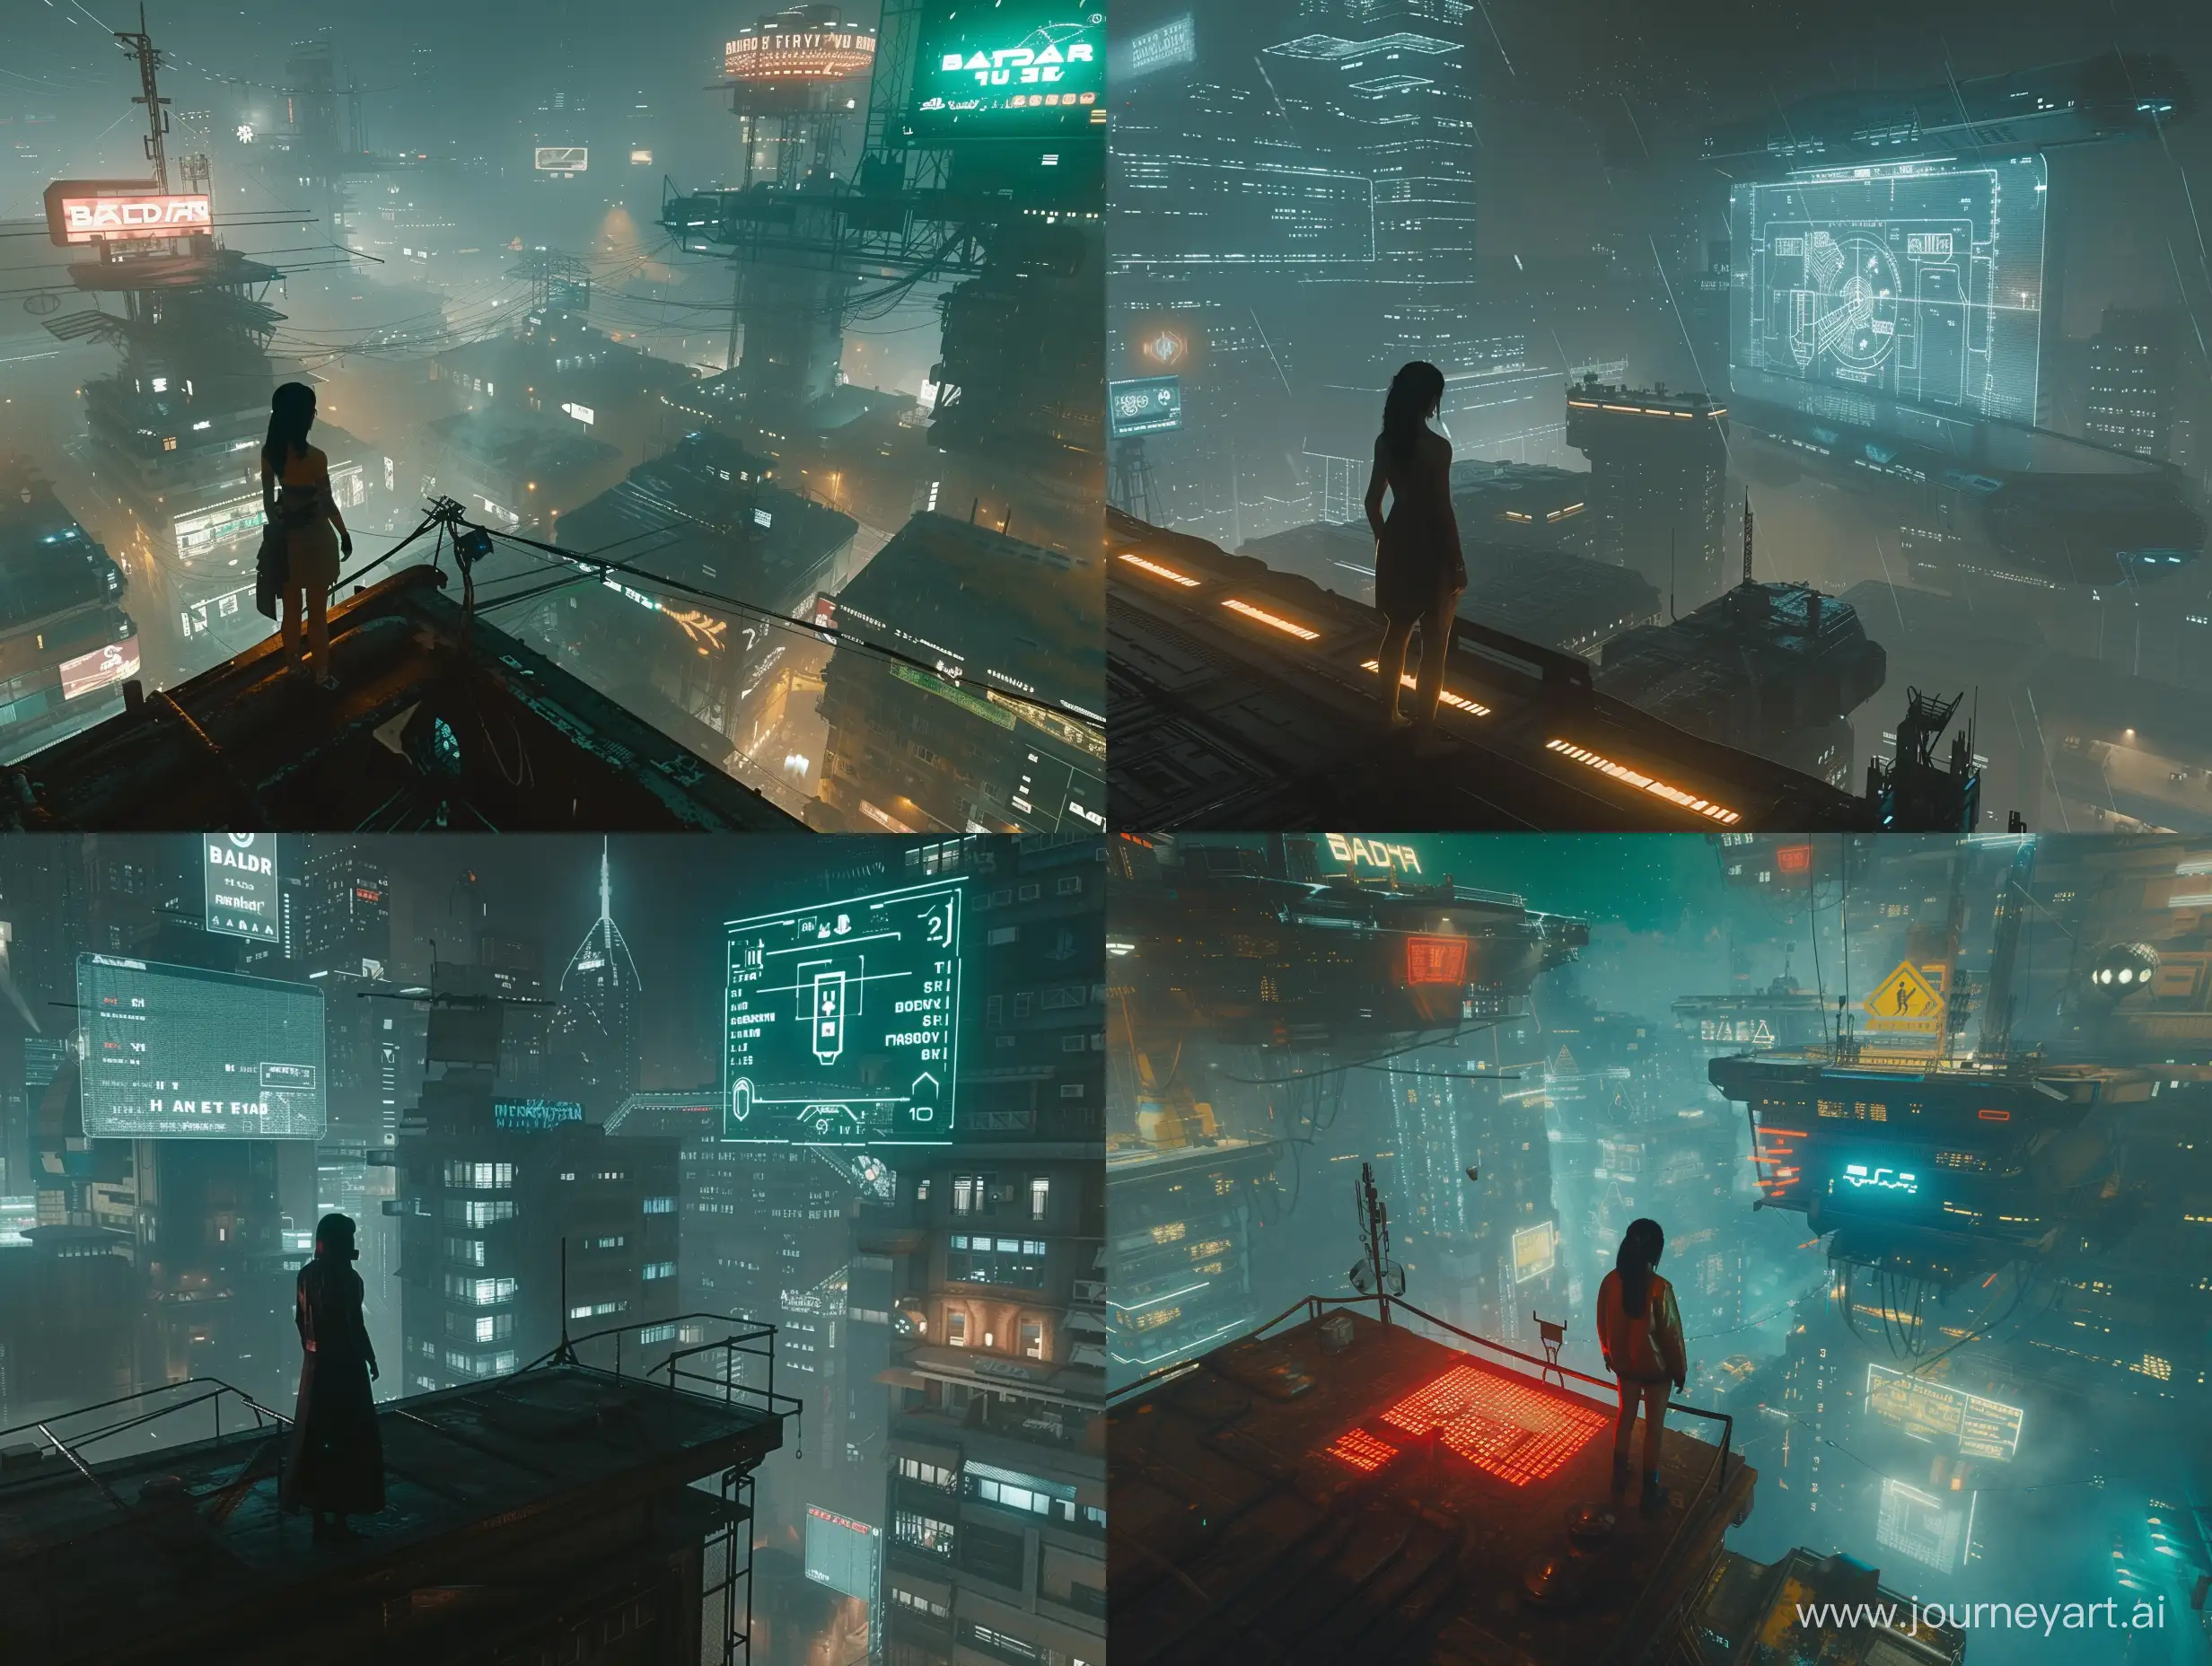 "Blade Runner" is a third-person video game that enables players to navigate a futuristic city featuring advanced ray tracing effects. This specific edition of the game is designed for the PS5 console and includes traditional HUD elements such as the Health Bar, Map, and a female character standing on the rooftop.